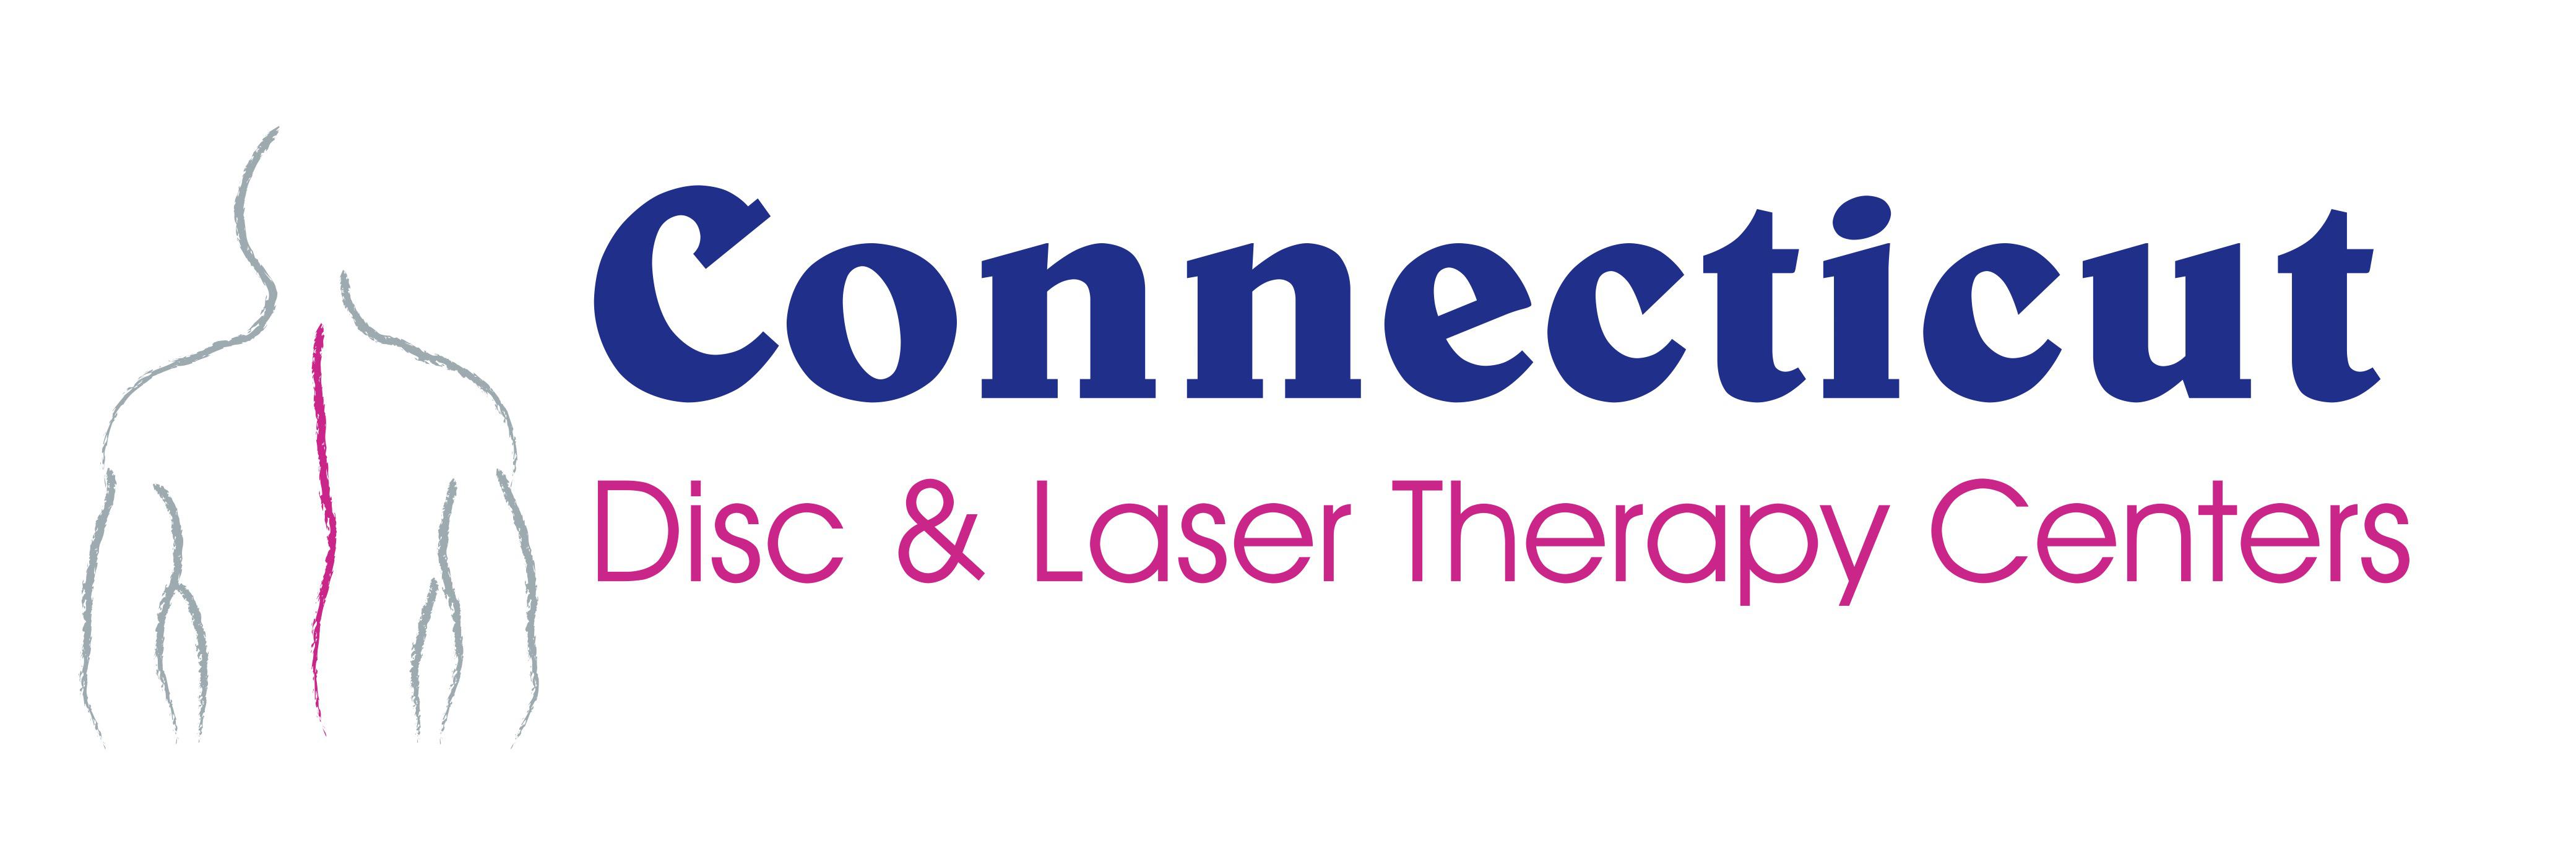 Connecticut Disc and Laser Therapy Centers Logo